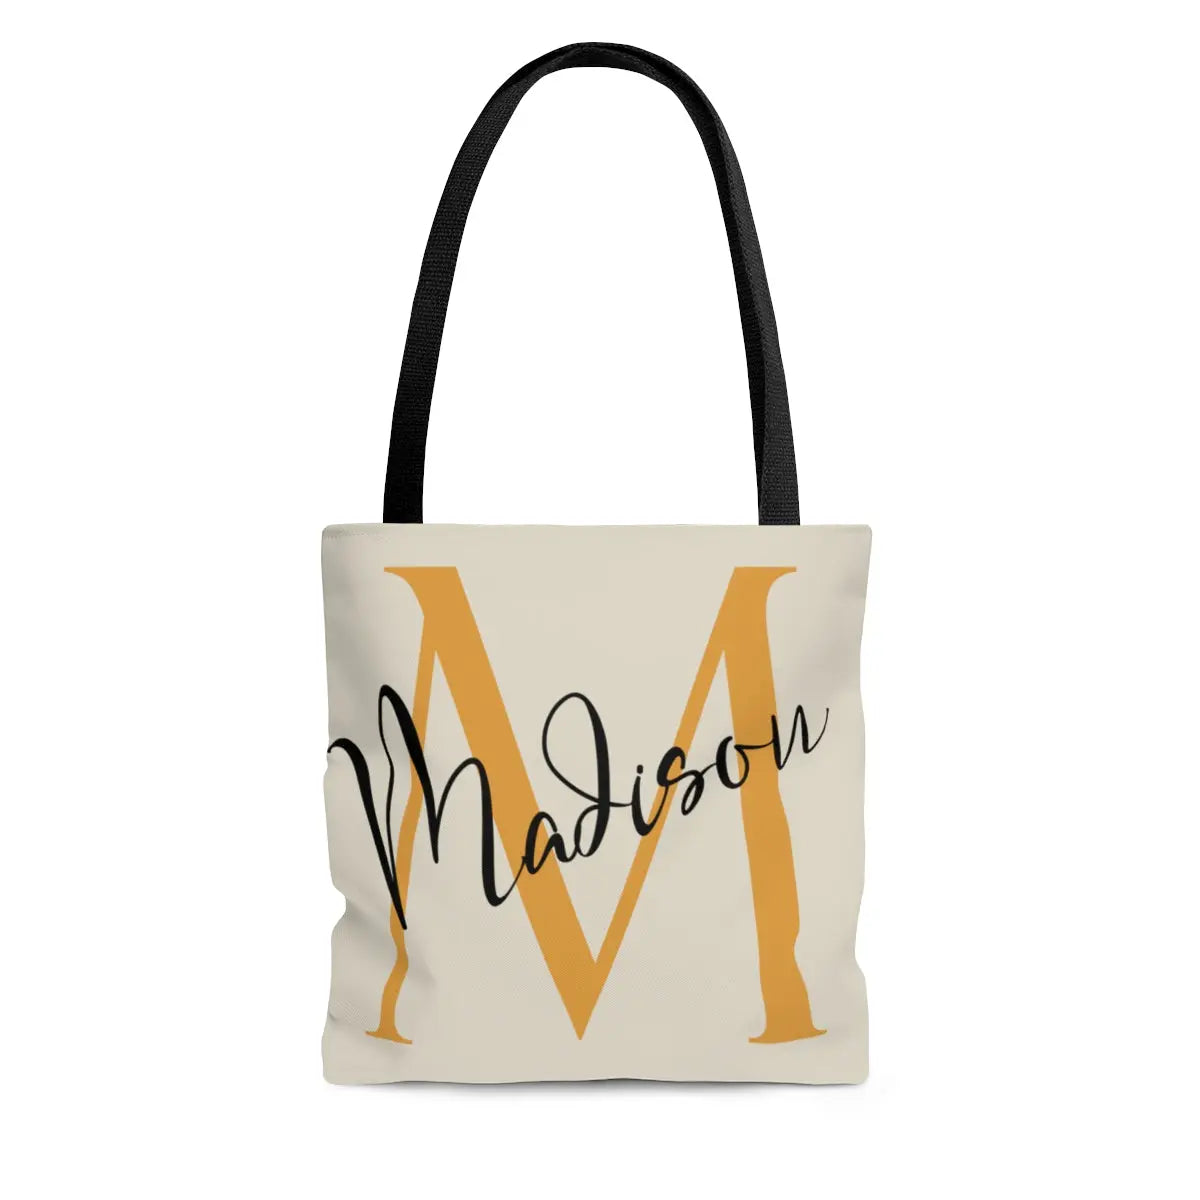 Bridal Party Monogram Tote Bags  Personalized Monogrammed Tote